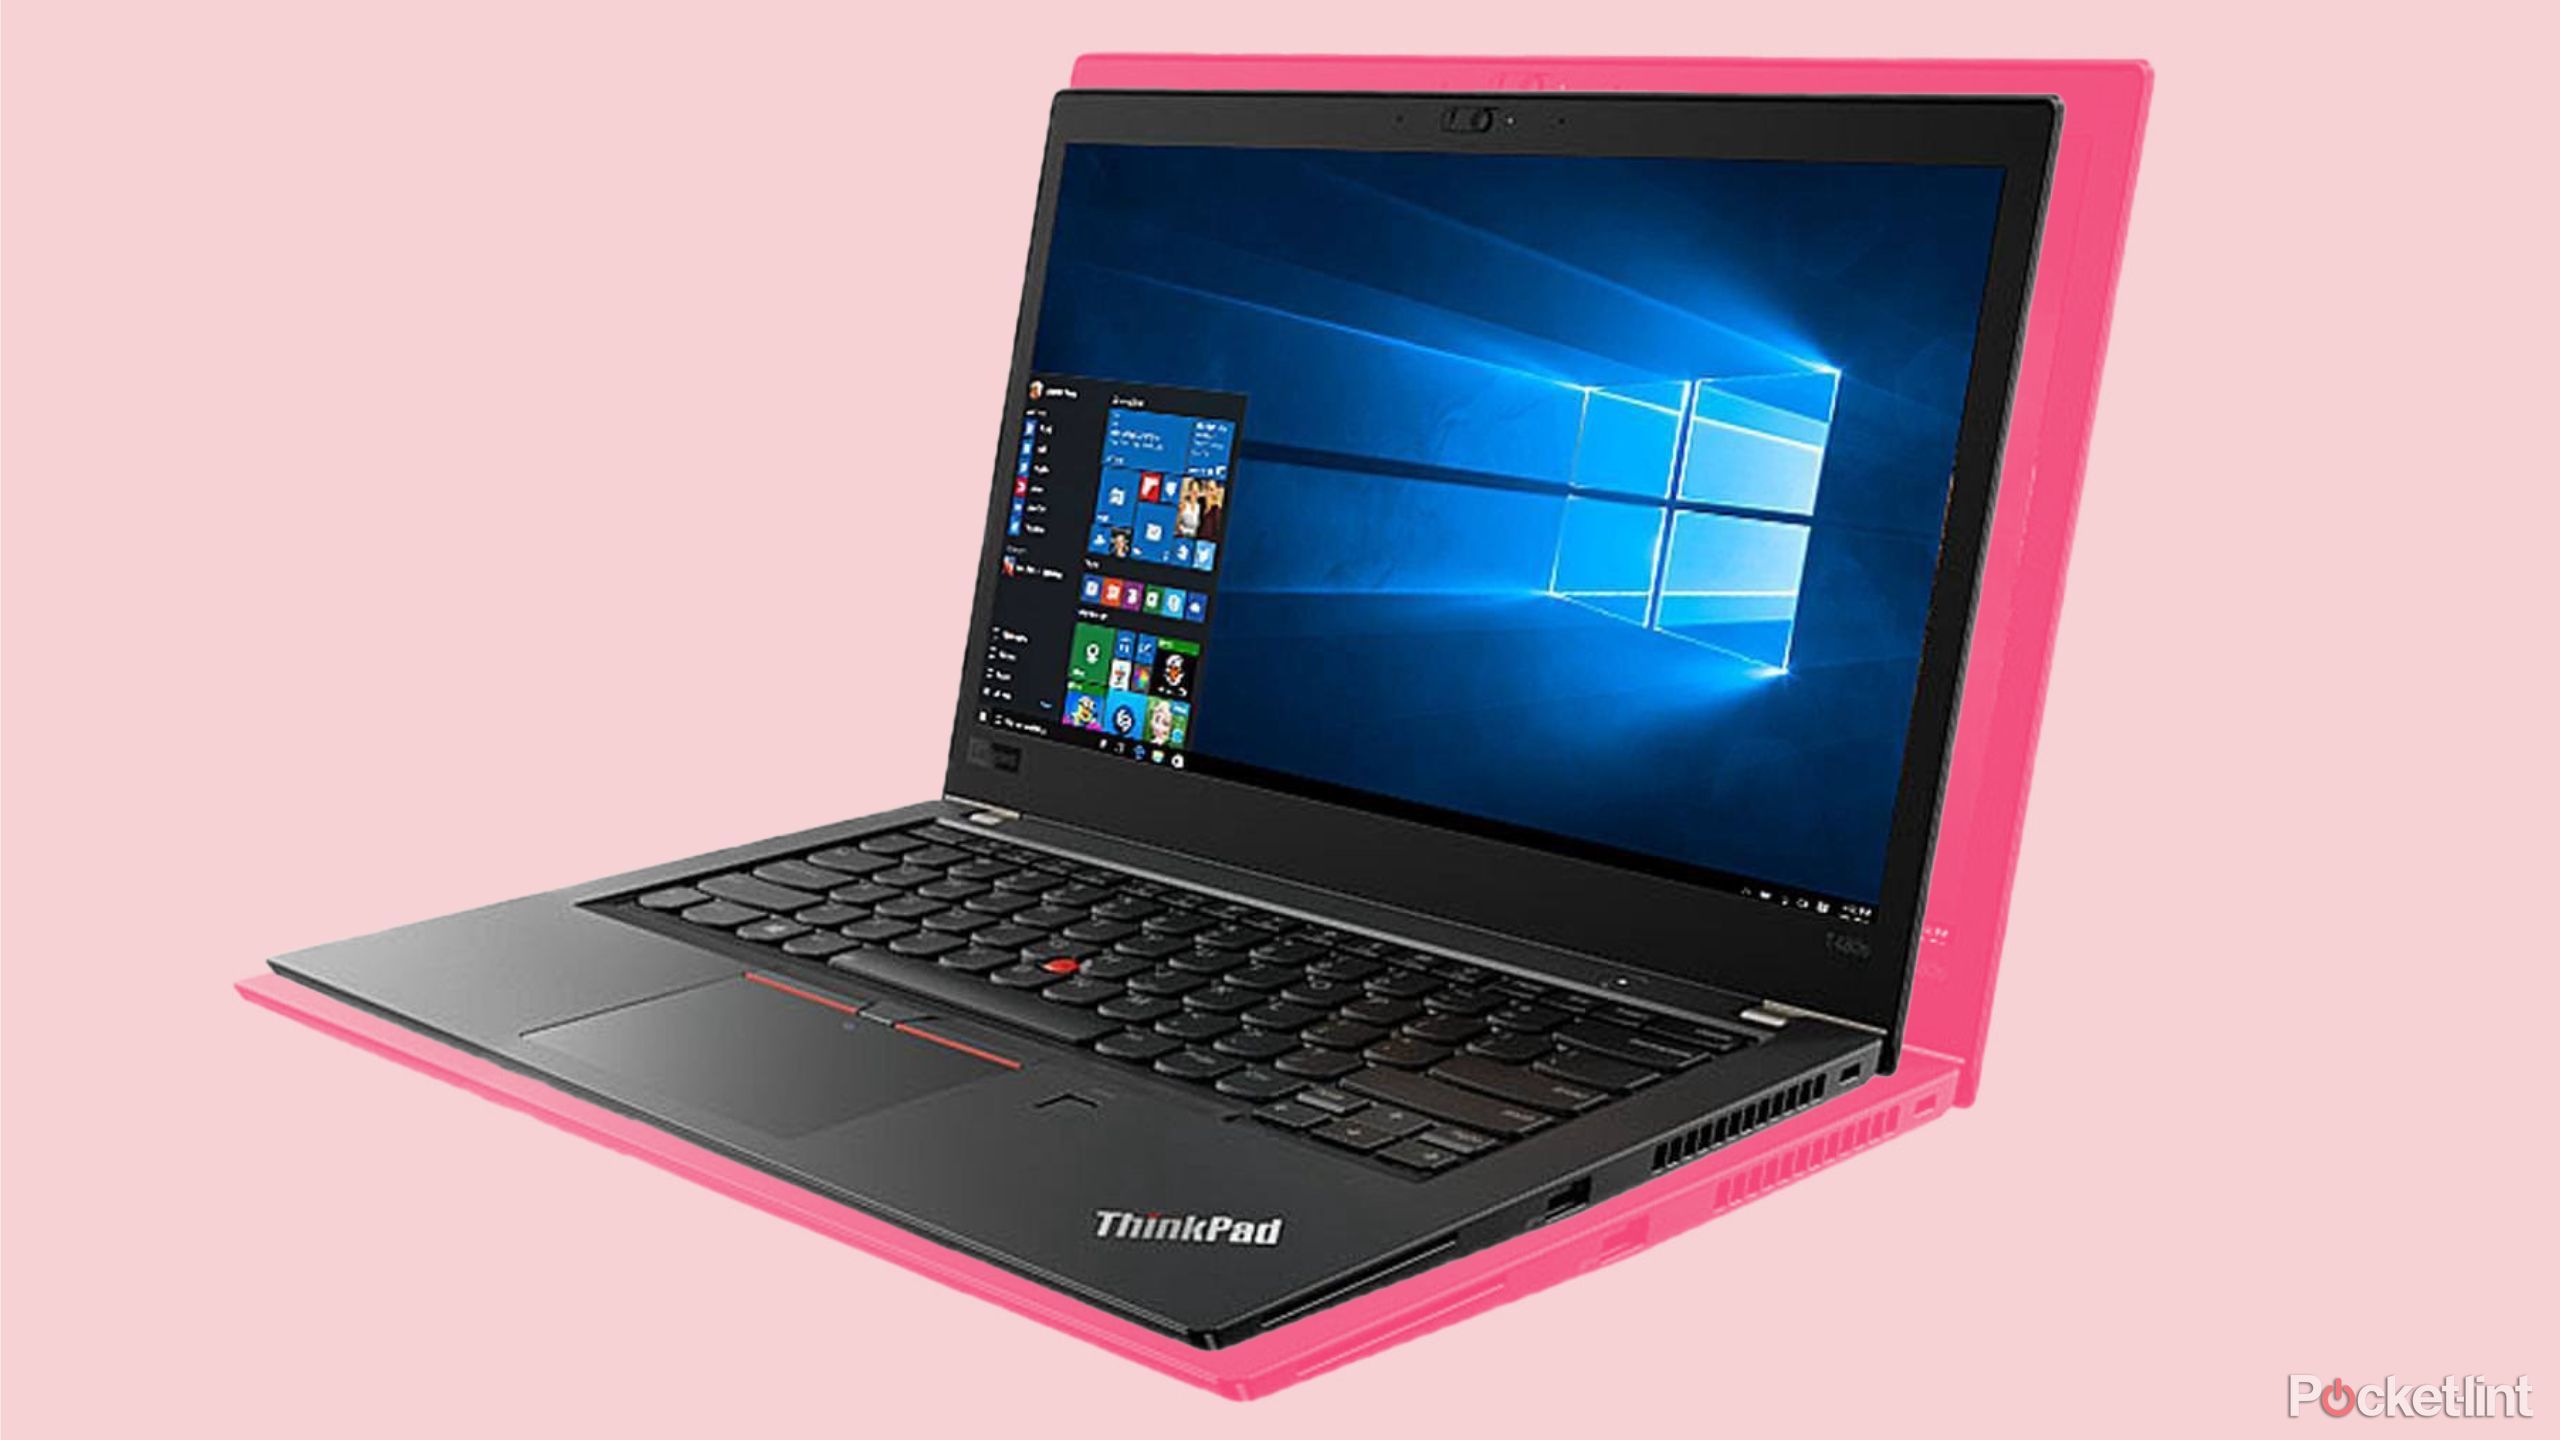 Lenovo ThinkPad troubleshooting: How to fix frequent and common issues